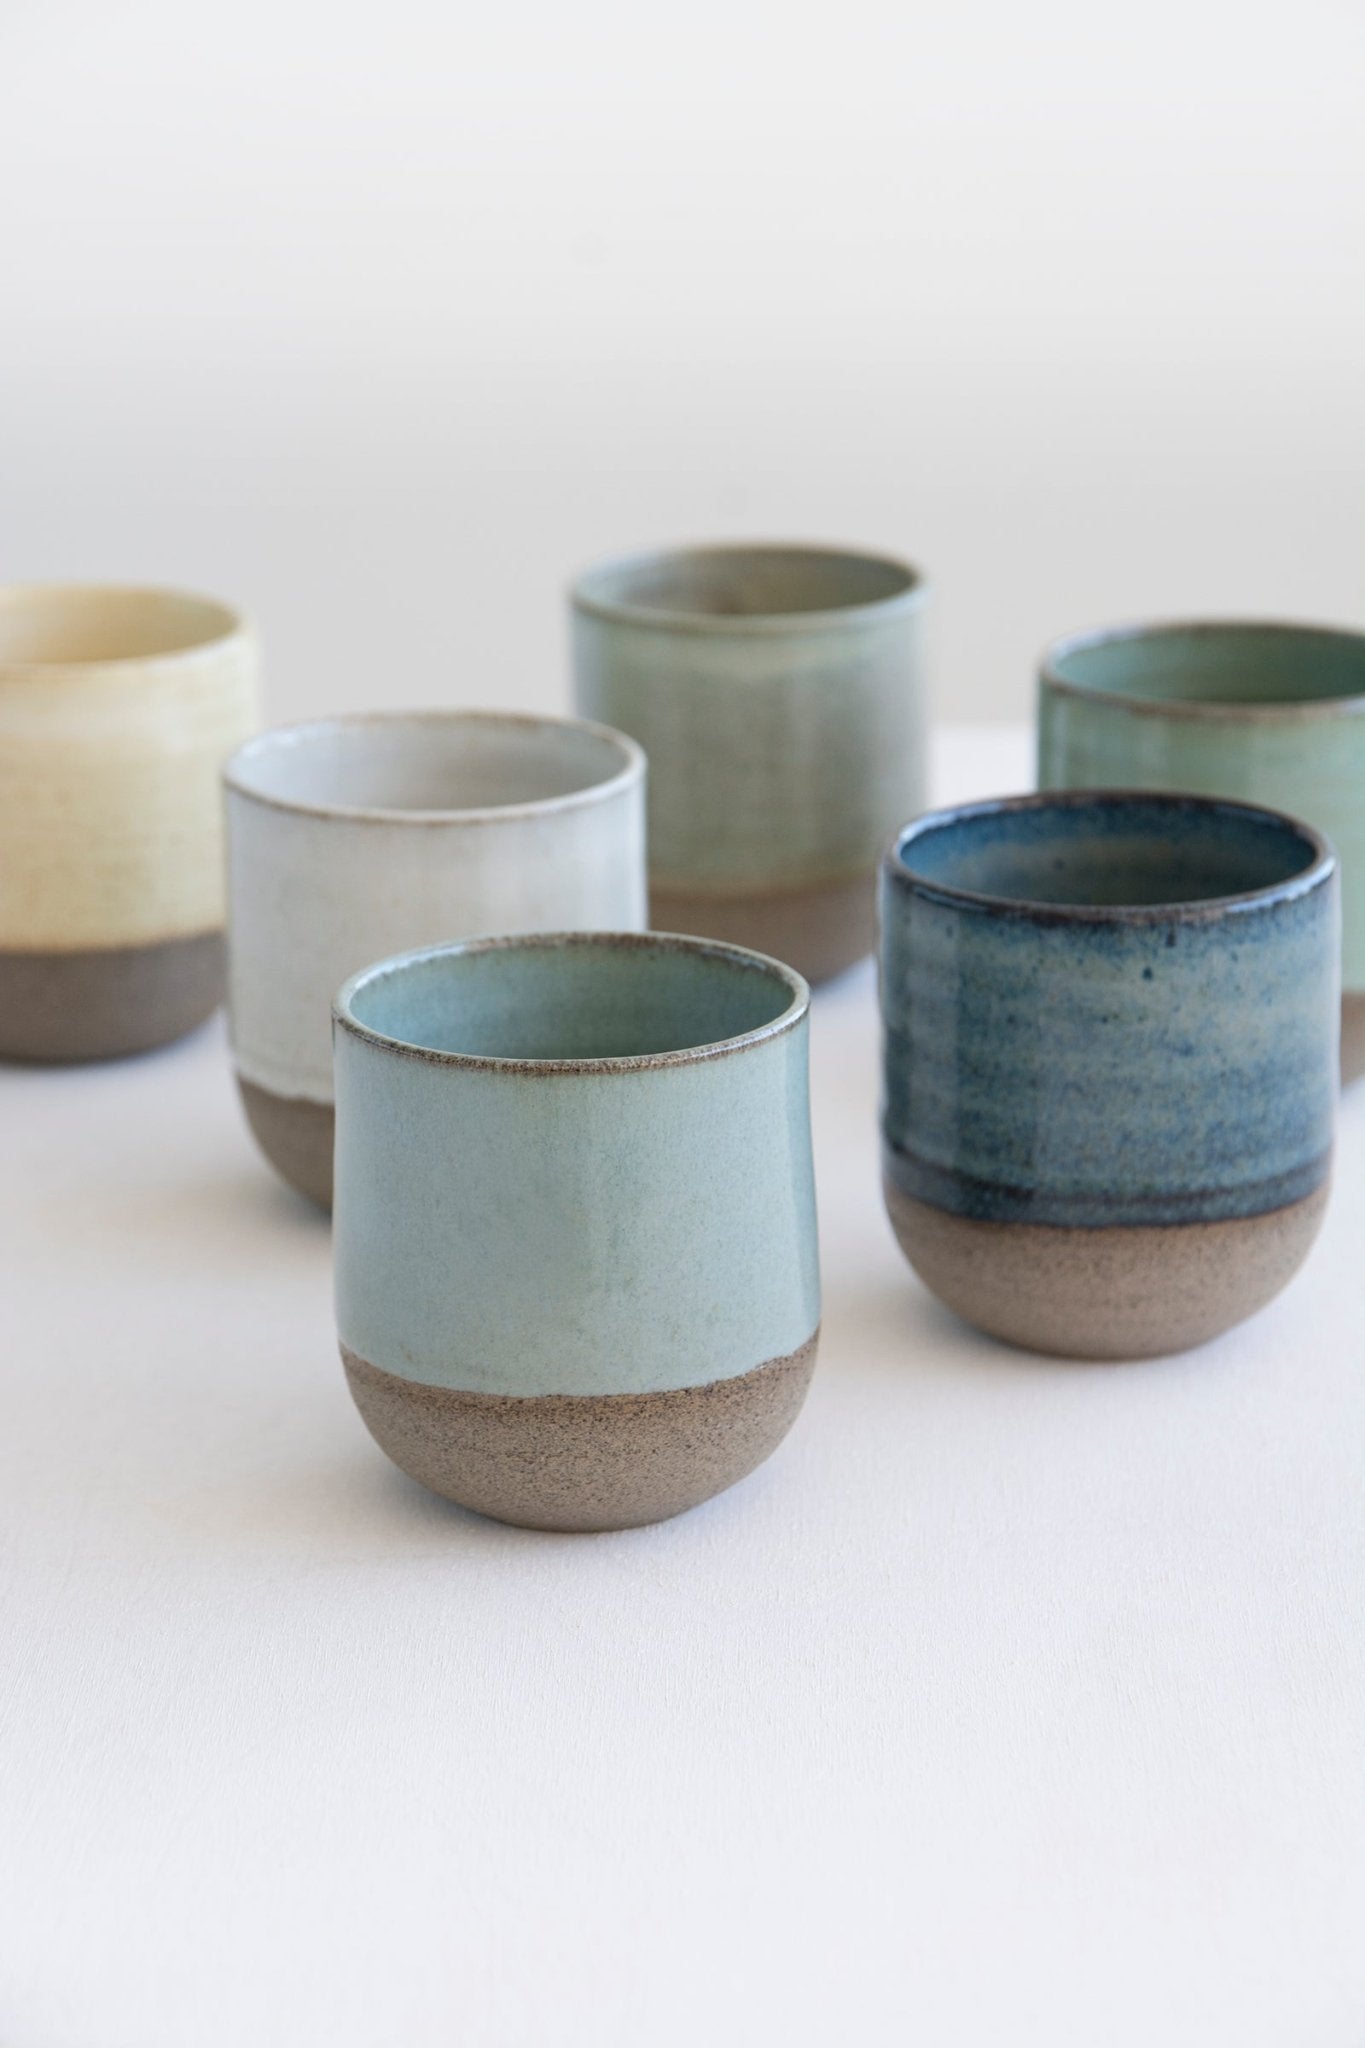 Espresso cups coffee ceramic stoneware pottery - unique handmade created  with love to enamel colours - ideal for a morning …